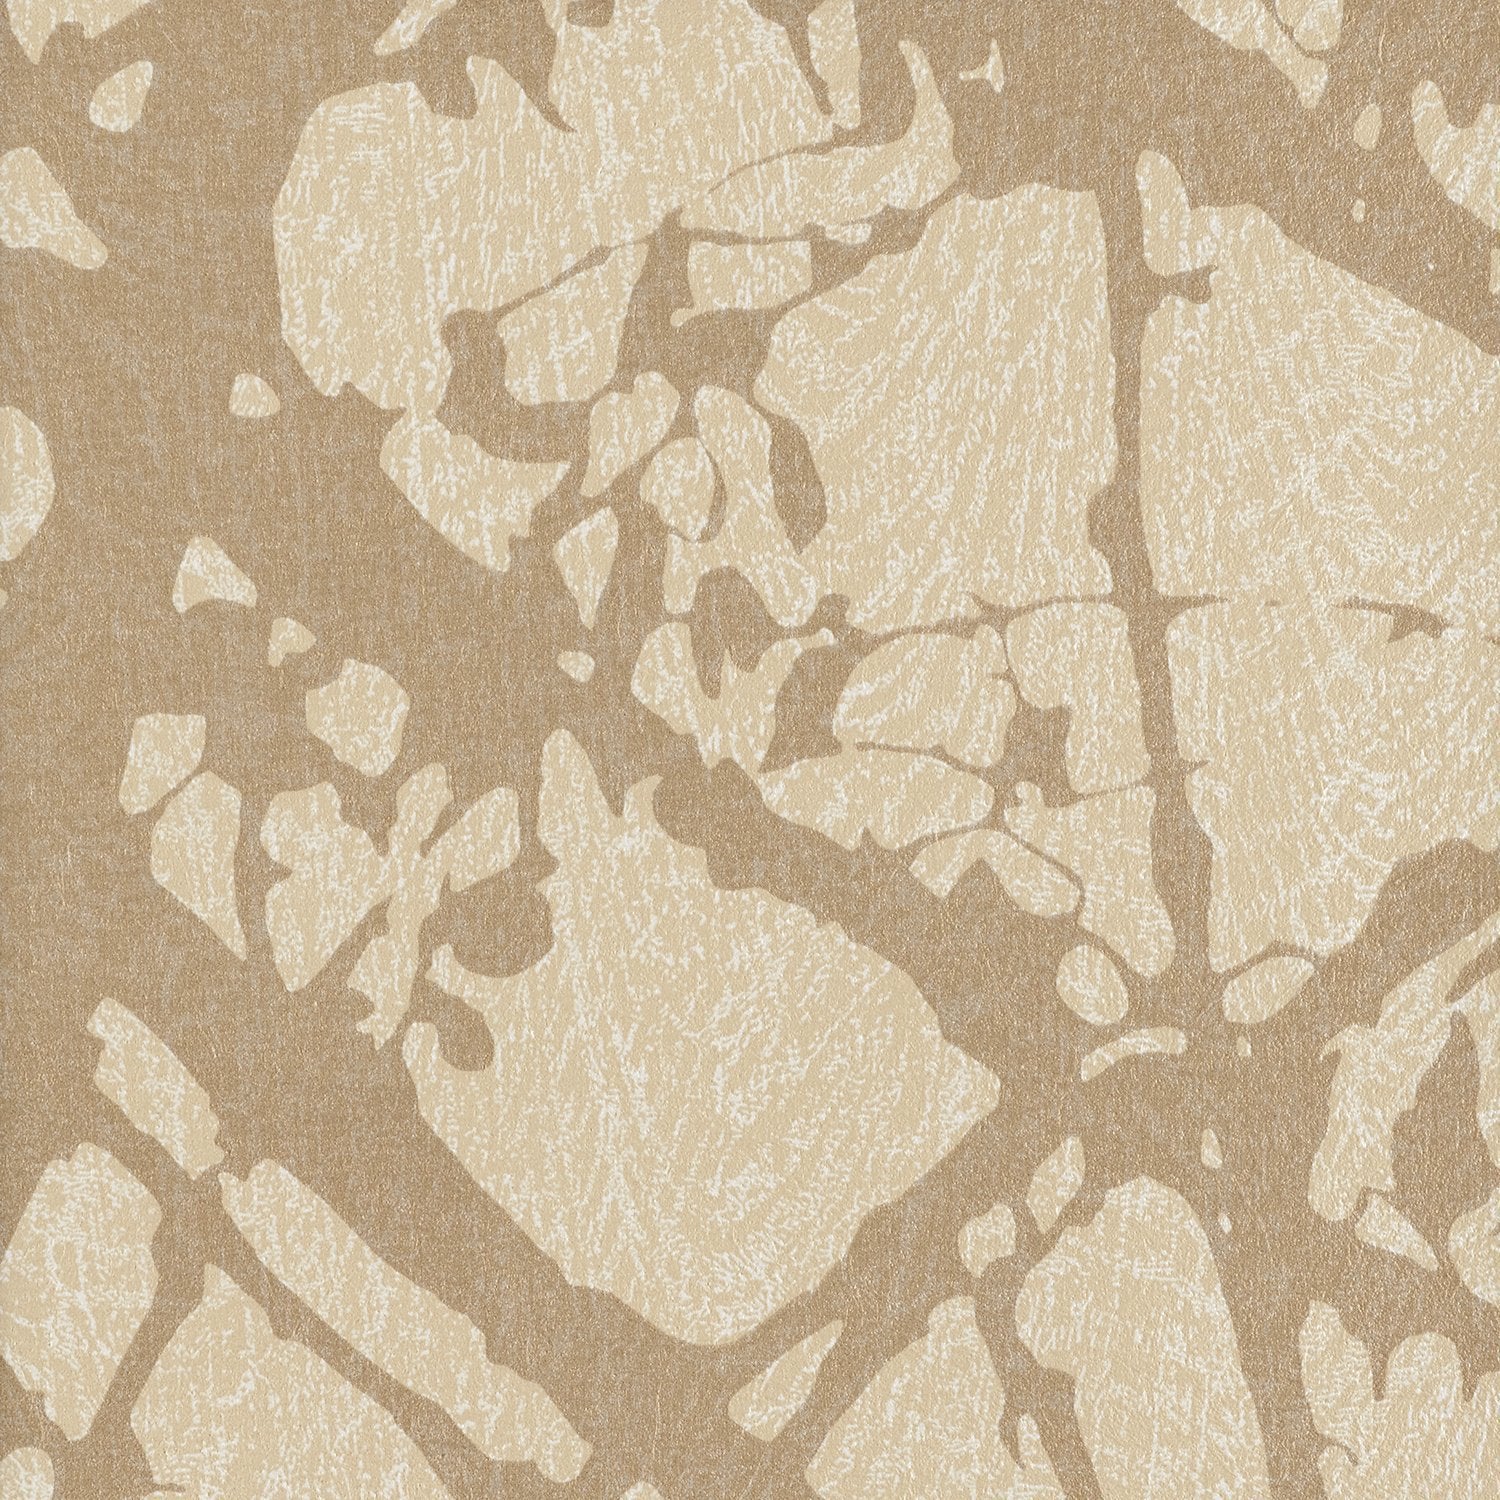 Canopy - Y46843 - Wallcovering - Vycon - Kube Contract